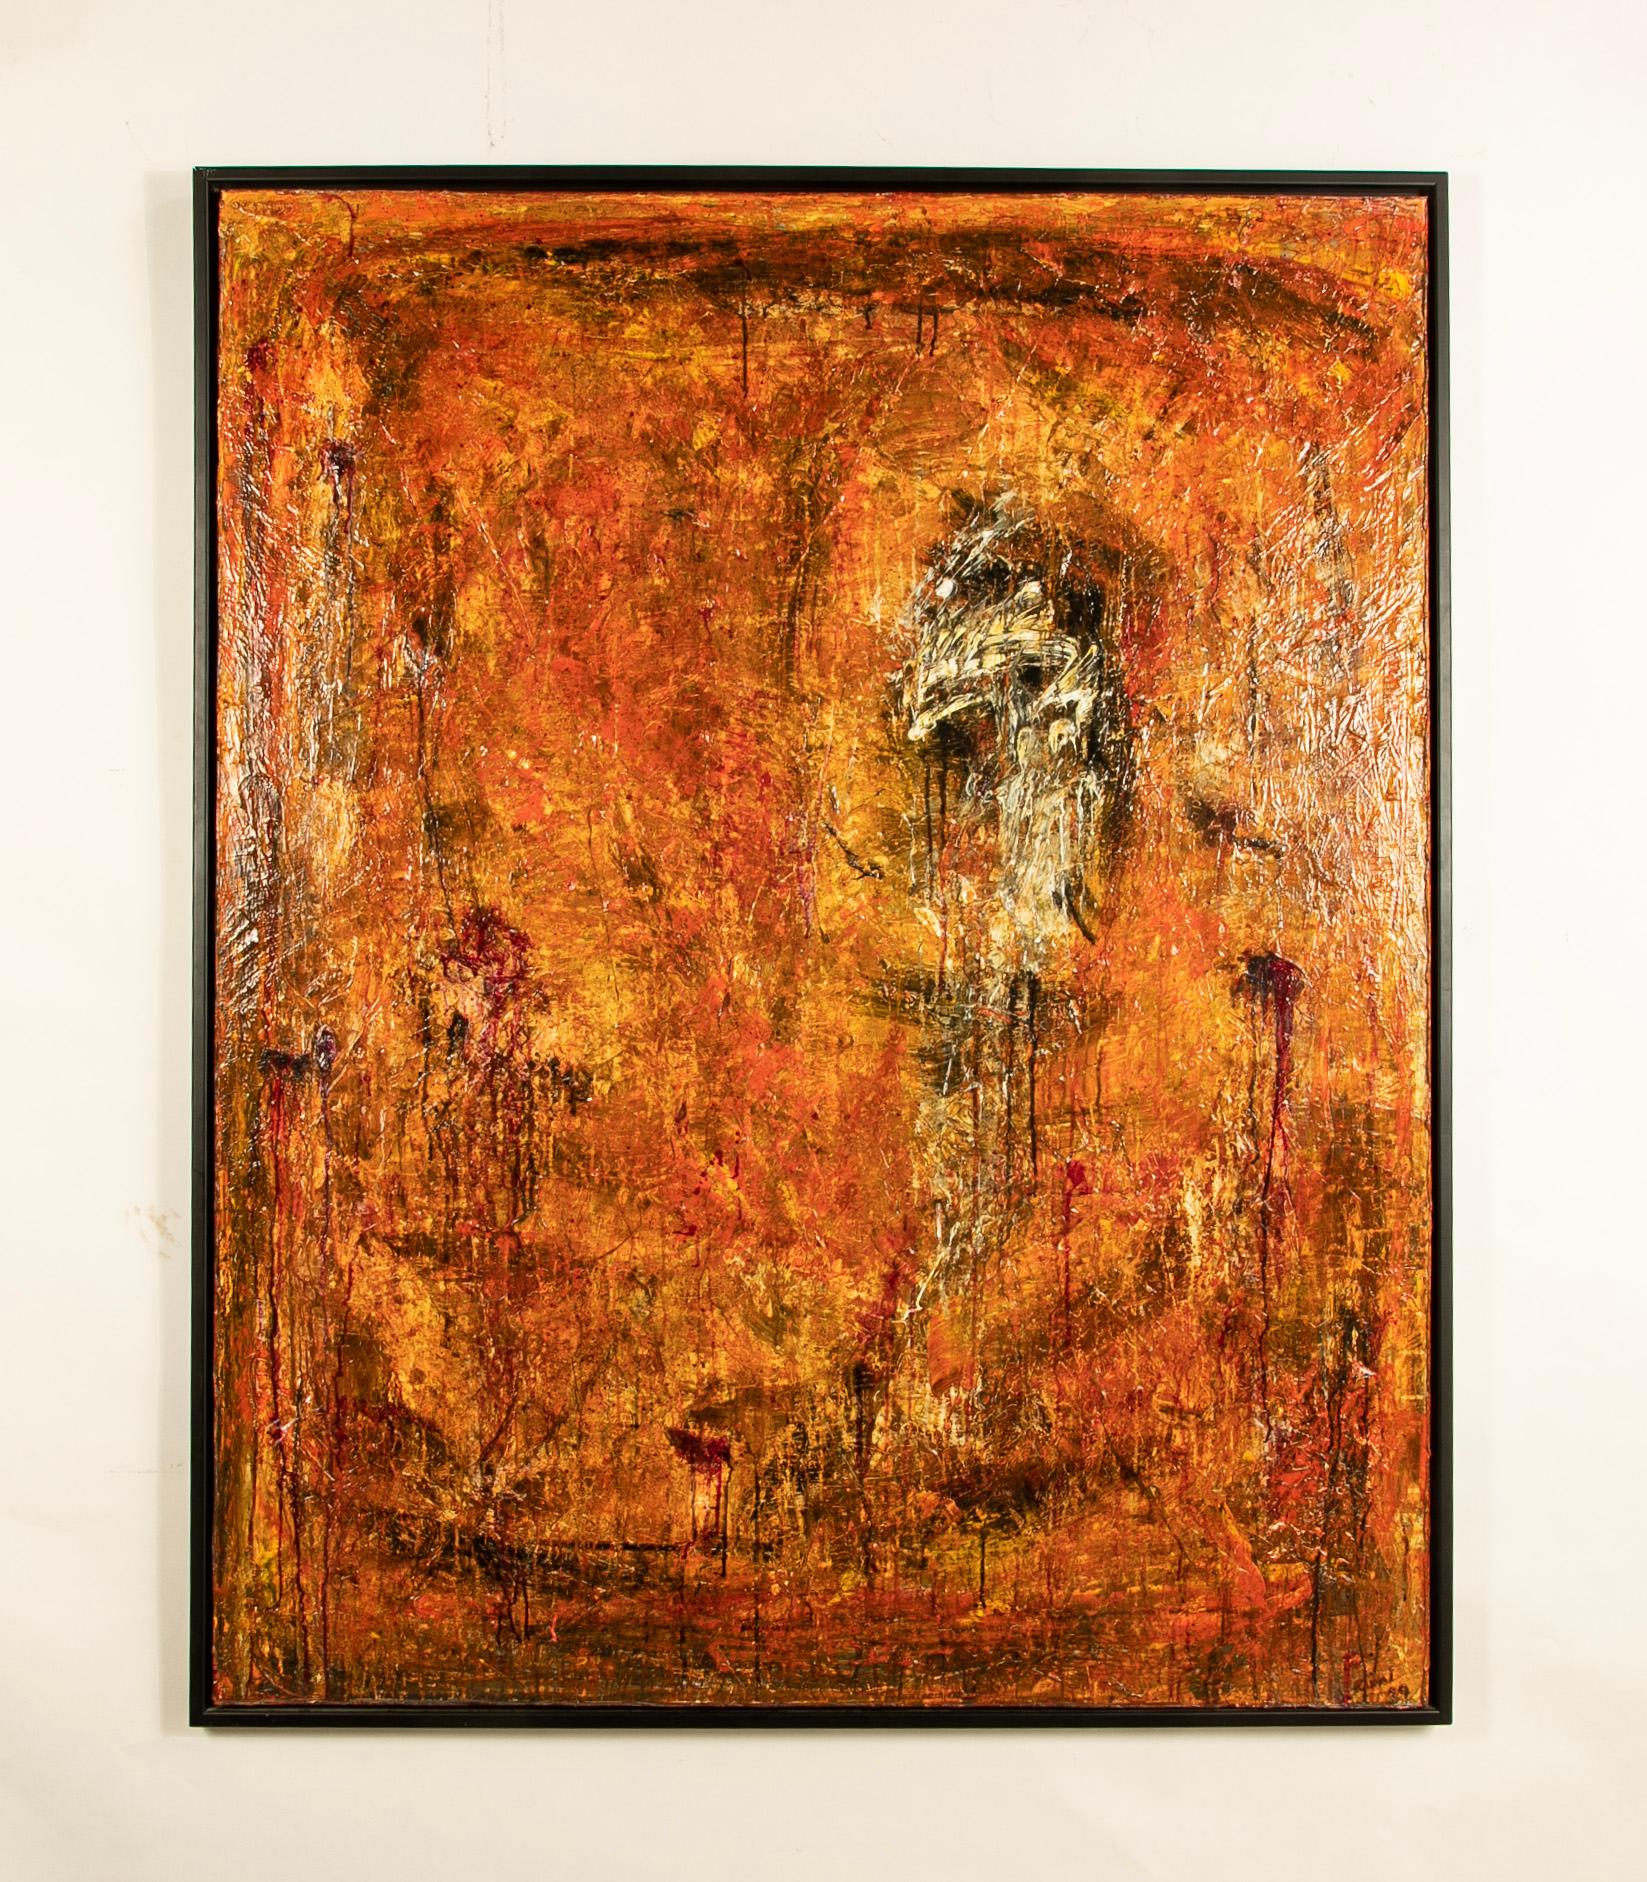 Contemporary listed artist Ricardo Rumi (b. 1960) is known for employing a thick impasto technique and strong brushstrokes in a post-Abstract Expressionist style . 

Many of his works have successfully been sold at auction recently, testifying to an